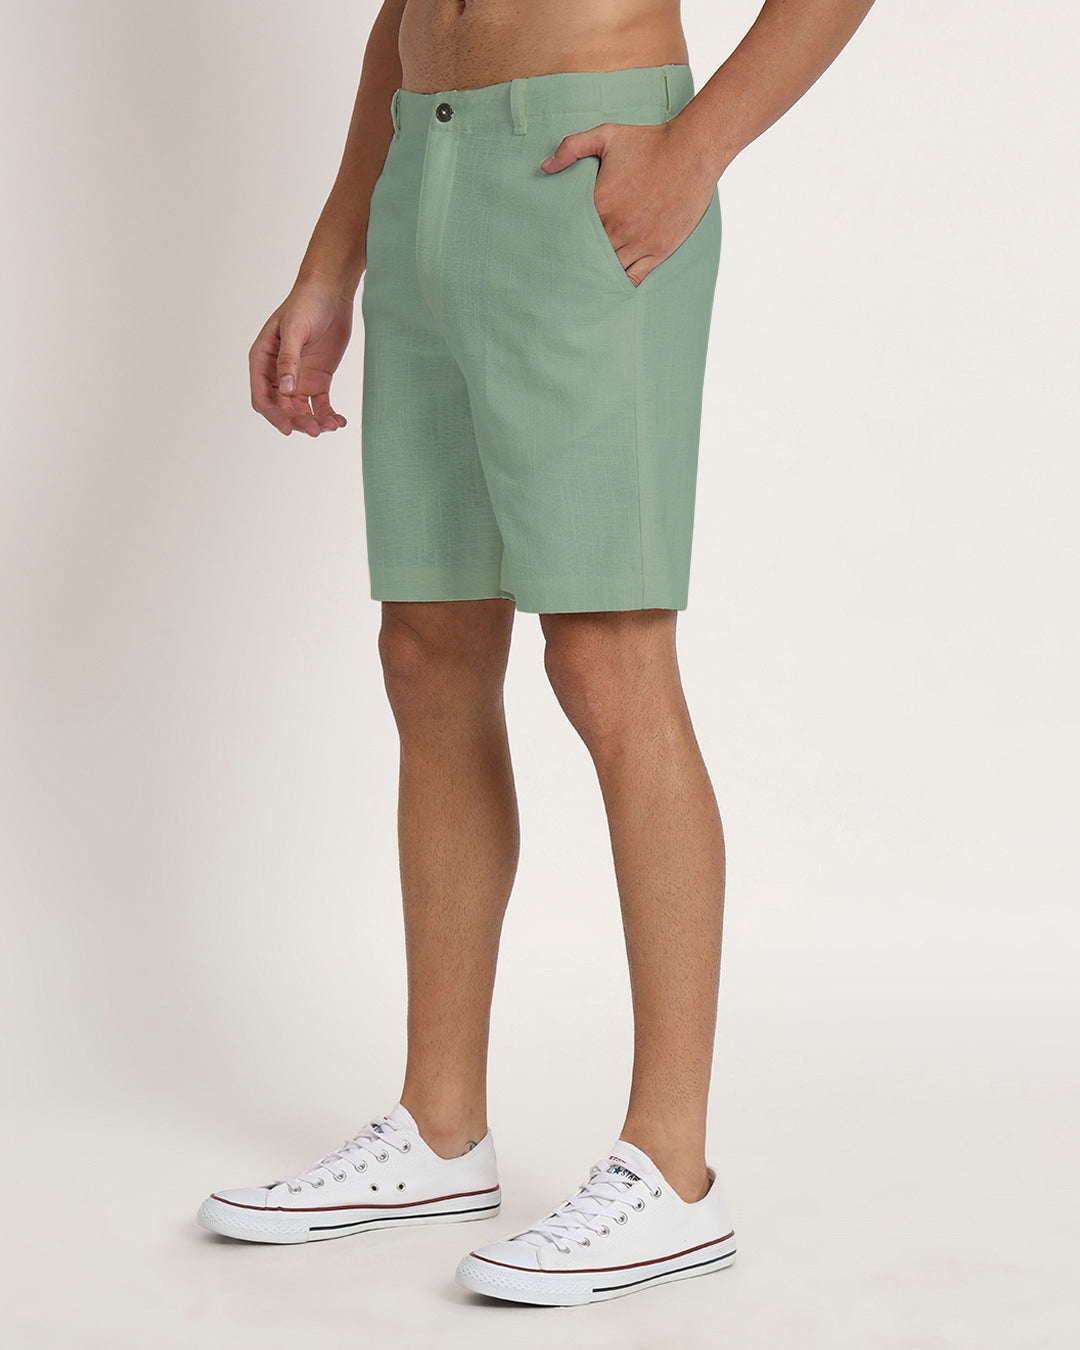 Combo : Ready For Anything Grey & Spring Green Men's Shorts